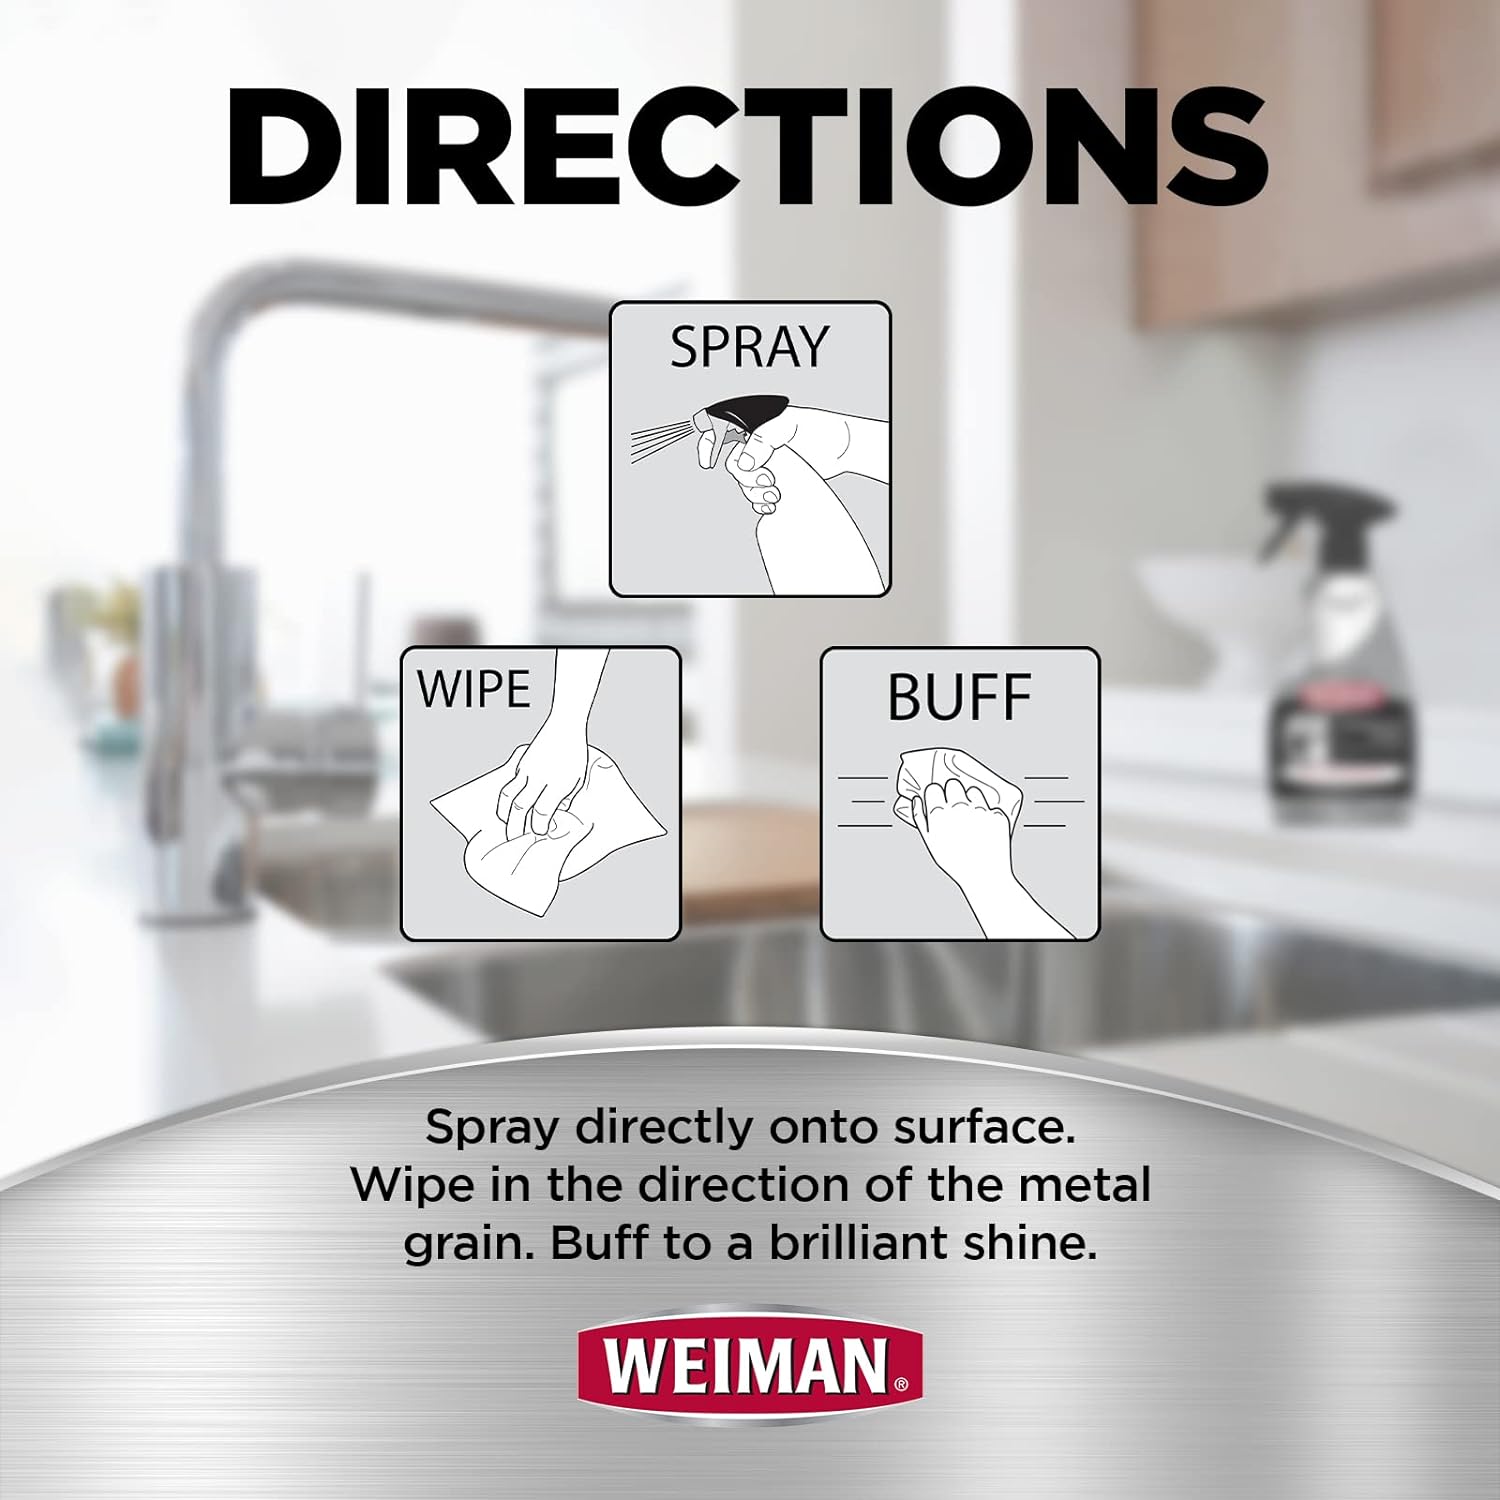 Weiman Stainless Steel Cleaner and Polish - 2 Pack Bundle With Microfiber Cloth - Protects Appliances from Fingerprints and Leaves a Streak-Free Shine for Refrigerator Dishwasher Oven Grill etc : Health & Household